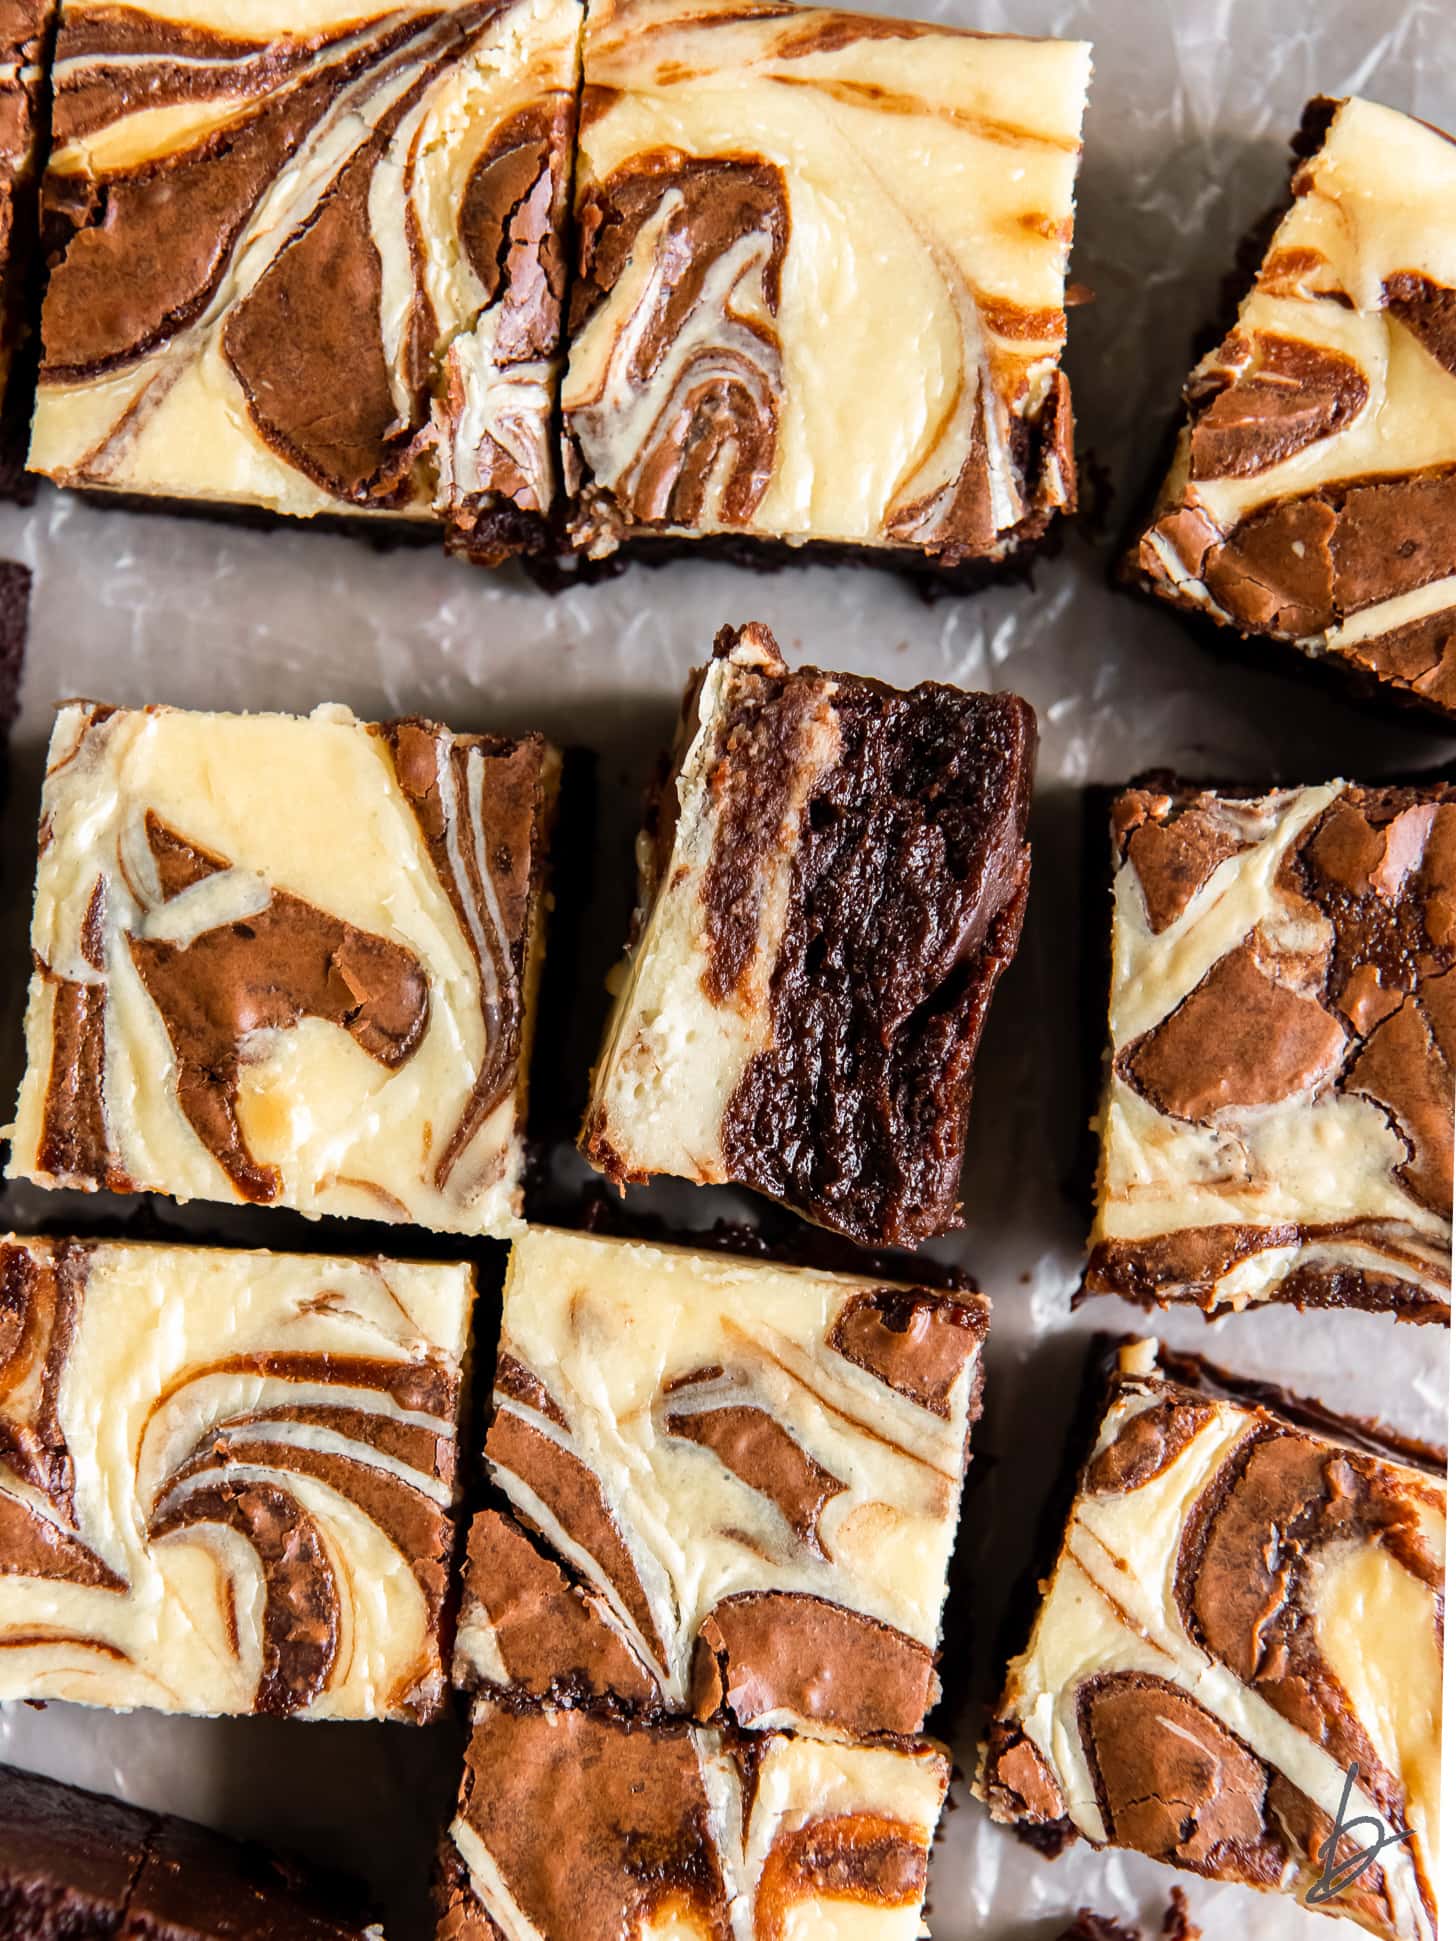 cream cheese swirl brownie on its side next to more brownies.